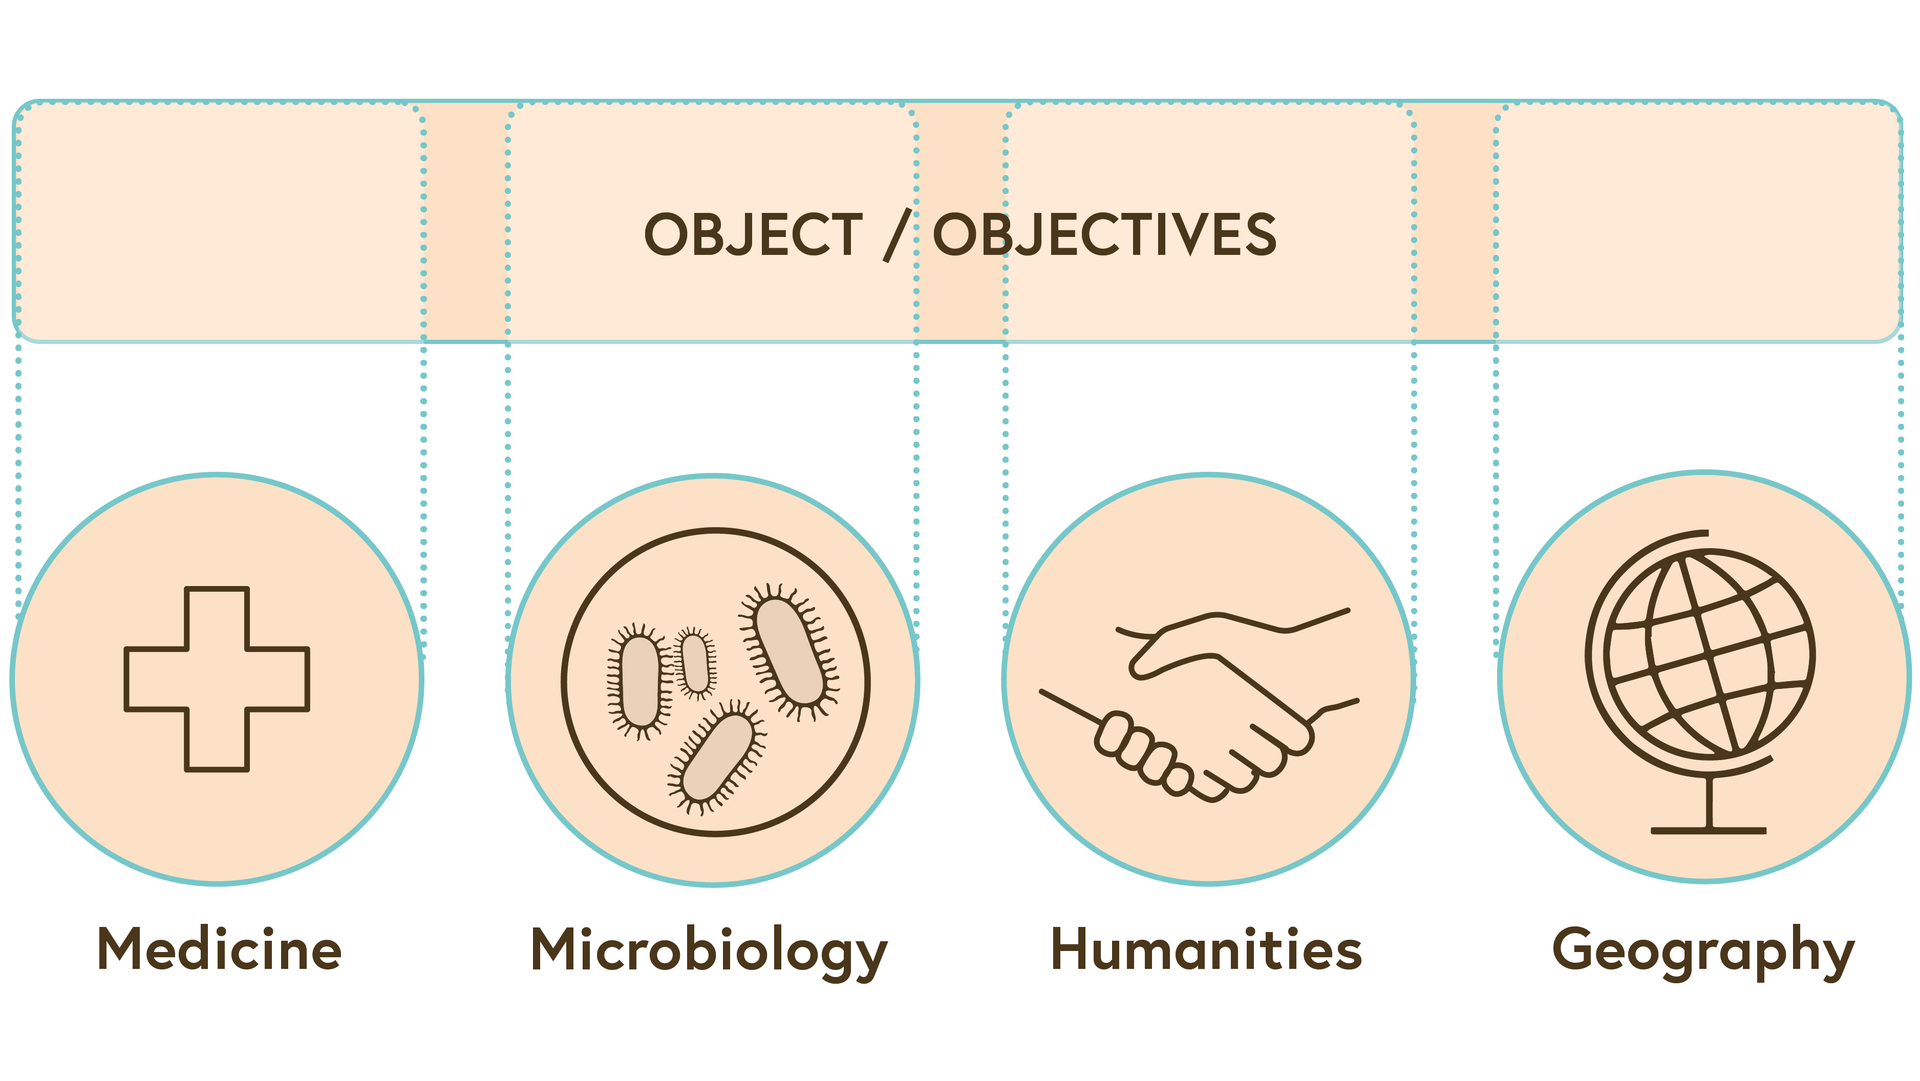 An illustration showing that the four different disciplines have a shared object/objective and each discipline uses its approaches to address it